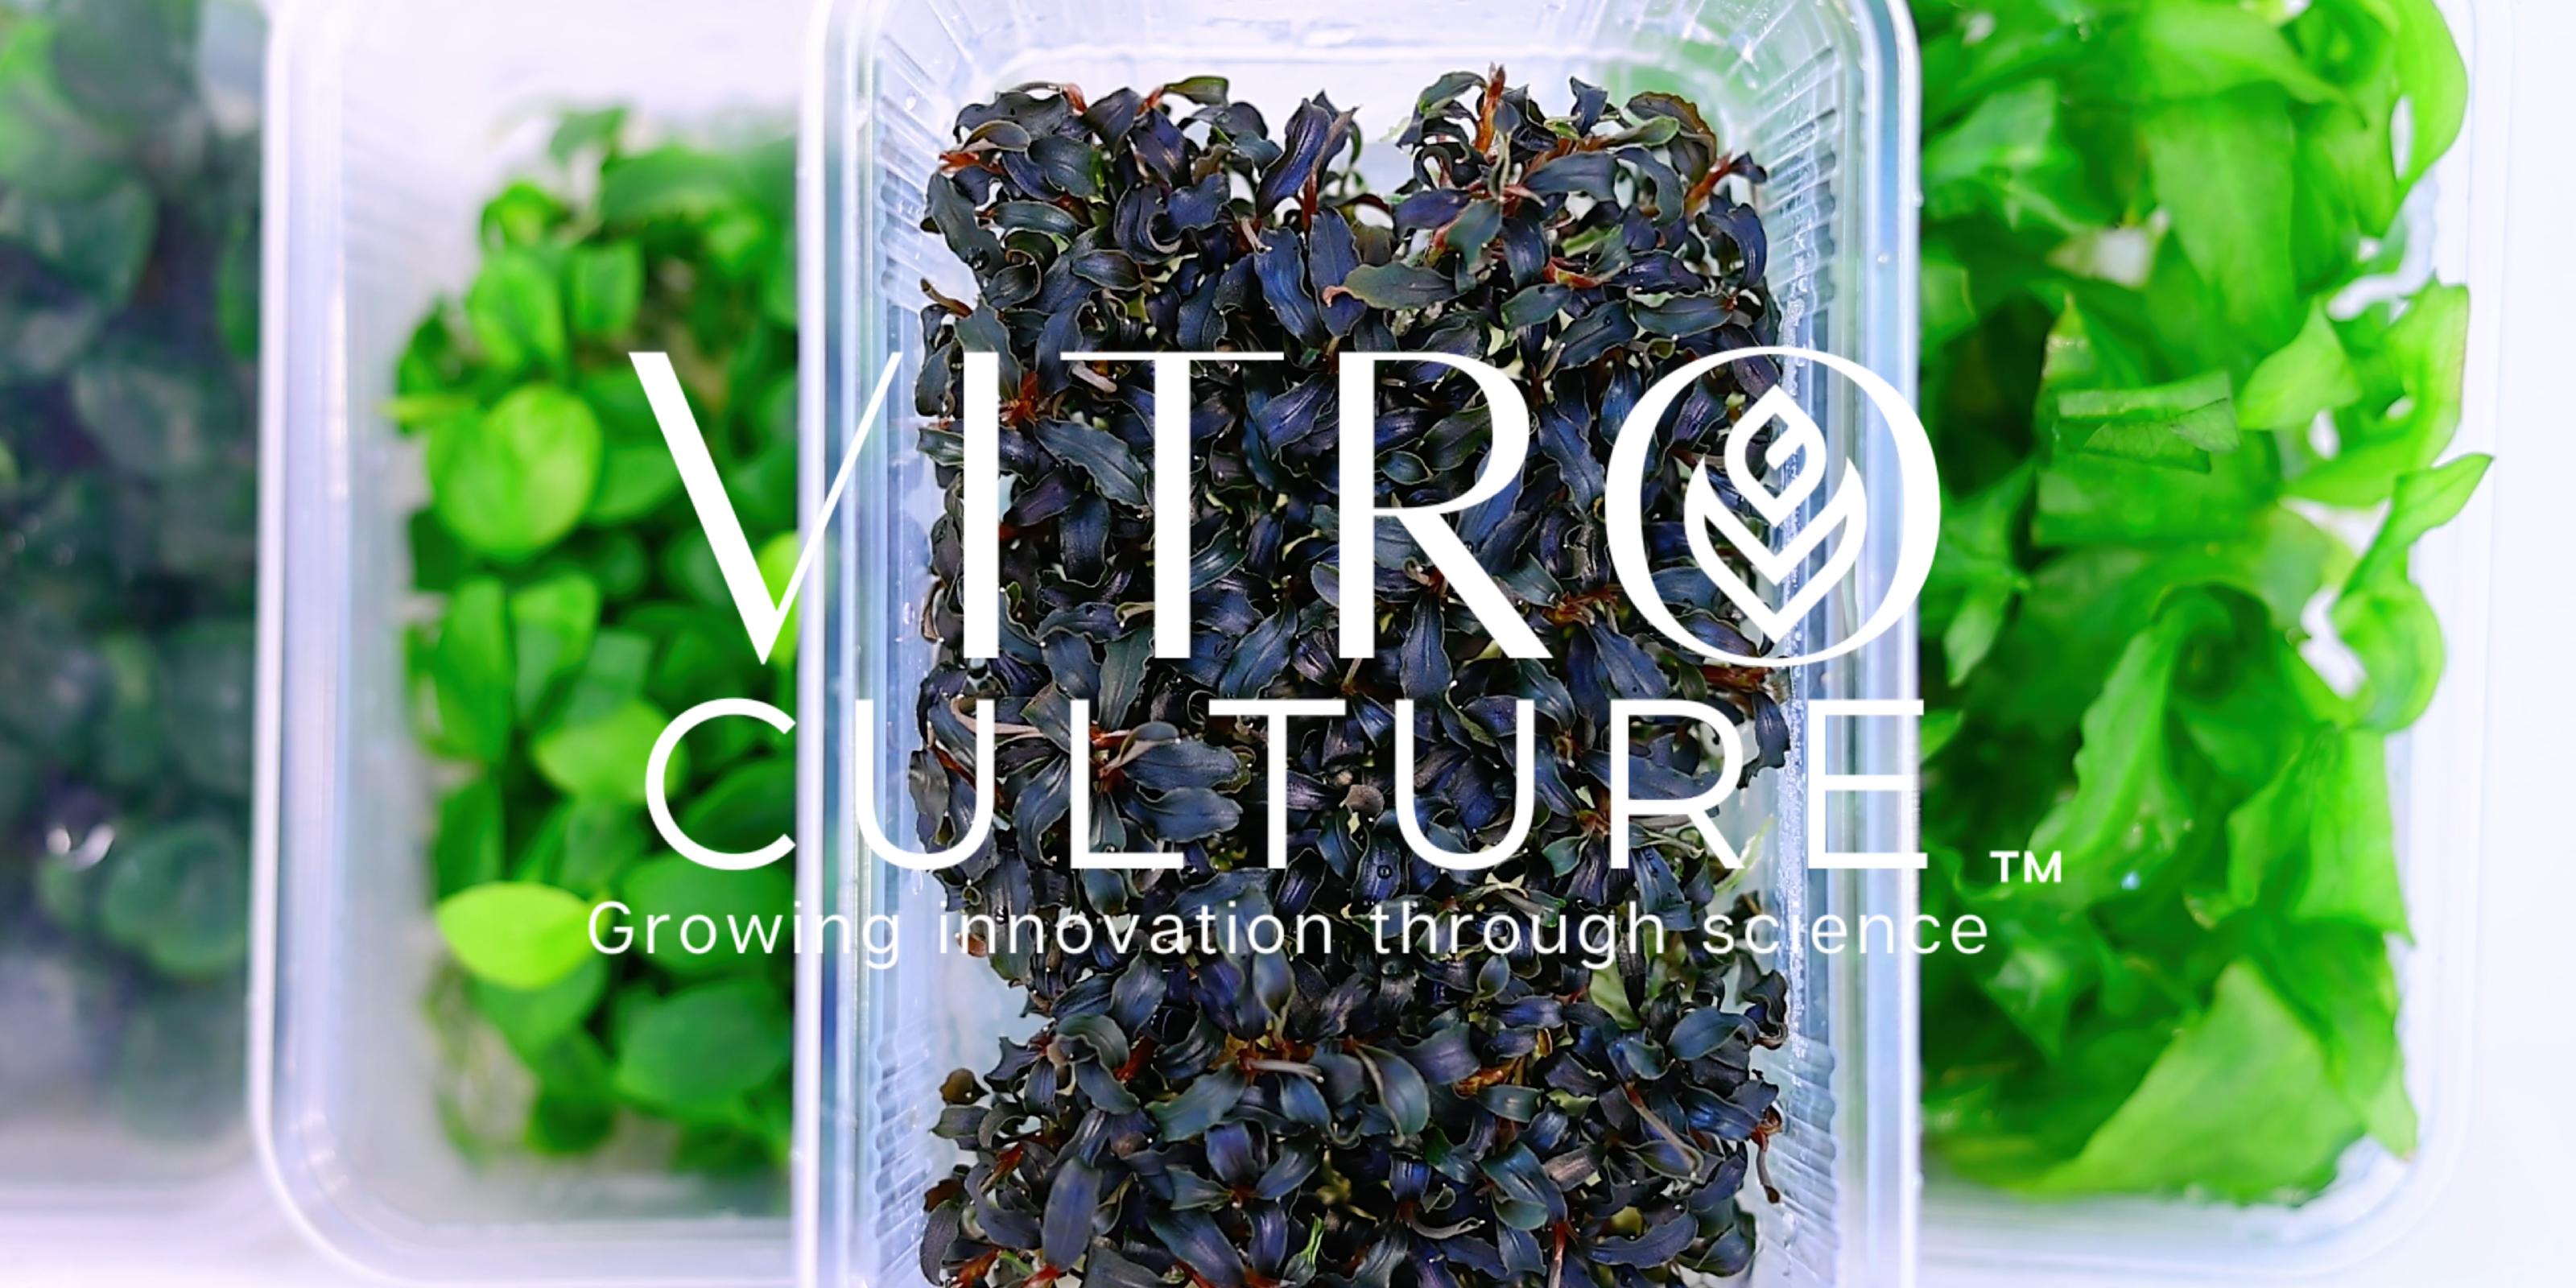 Introducing VitroCulture.com - Your Source for Tissue Culture Plants for Home and Aquarium